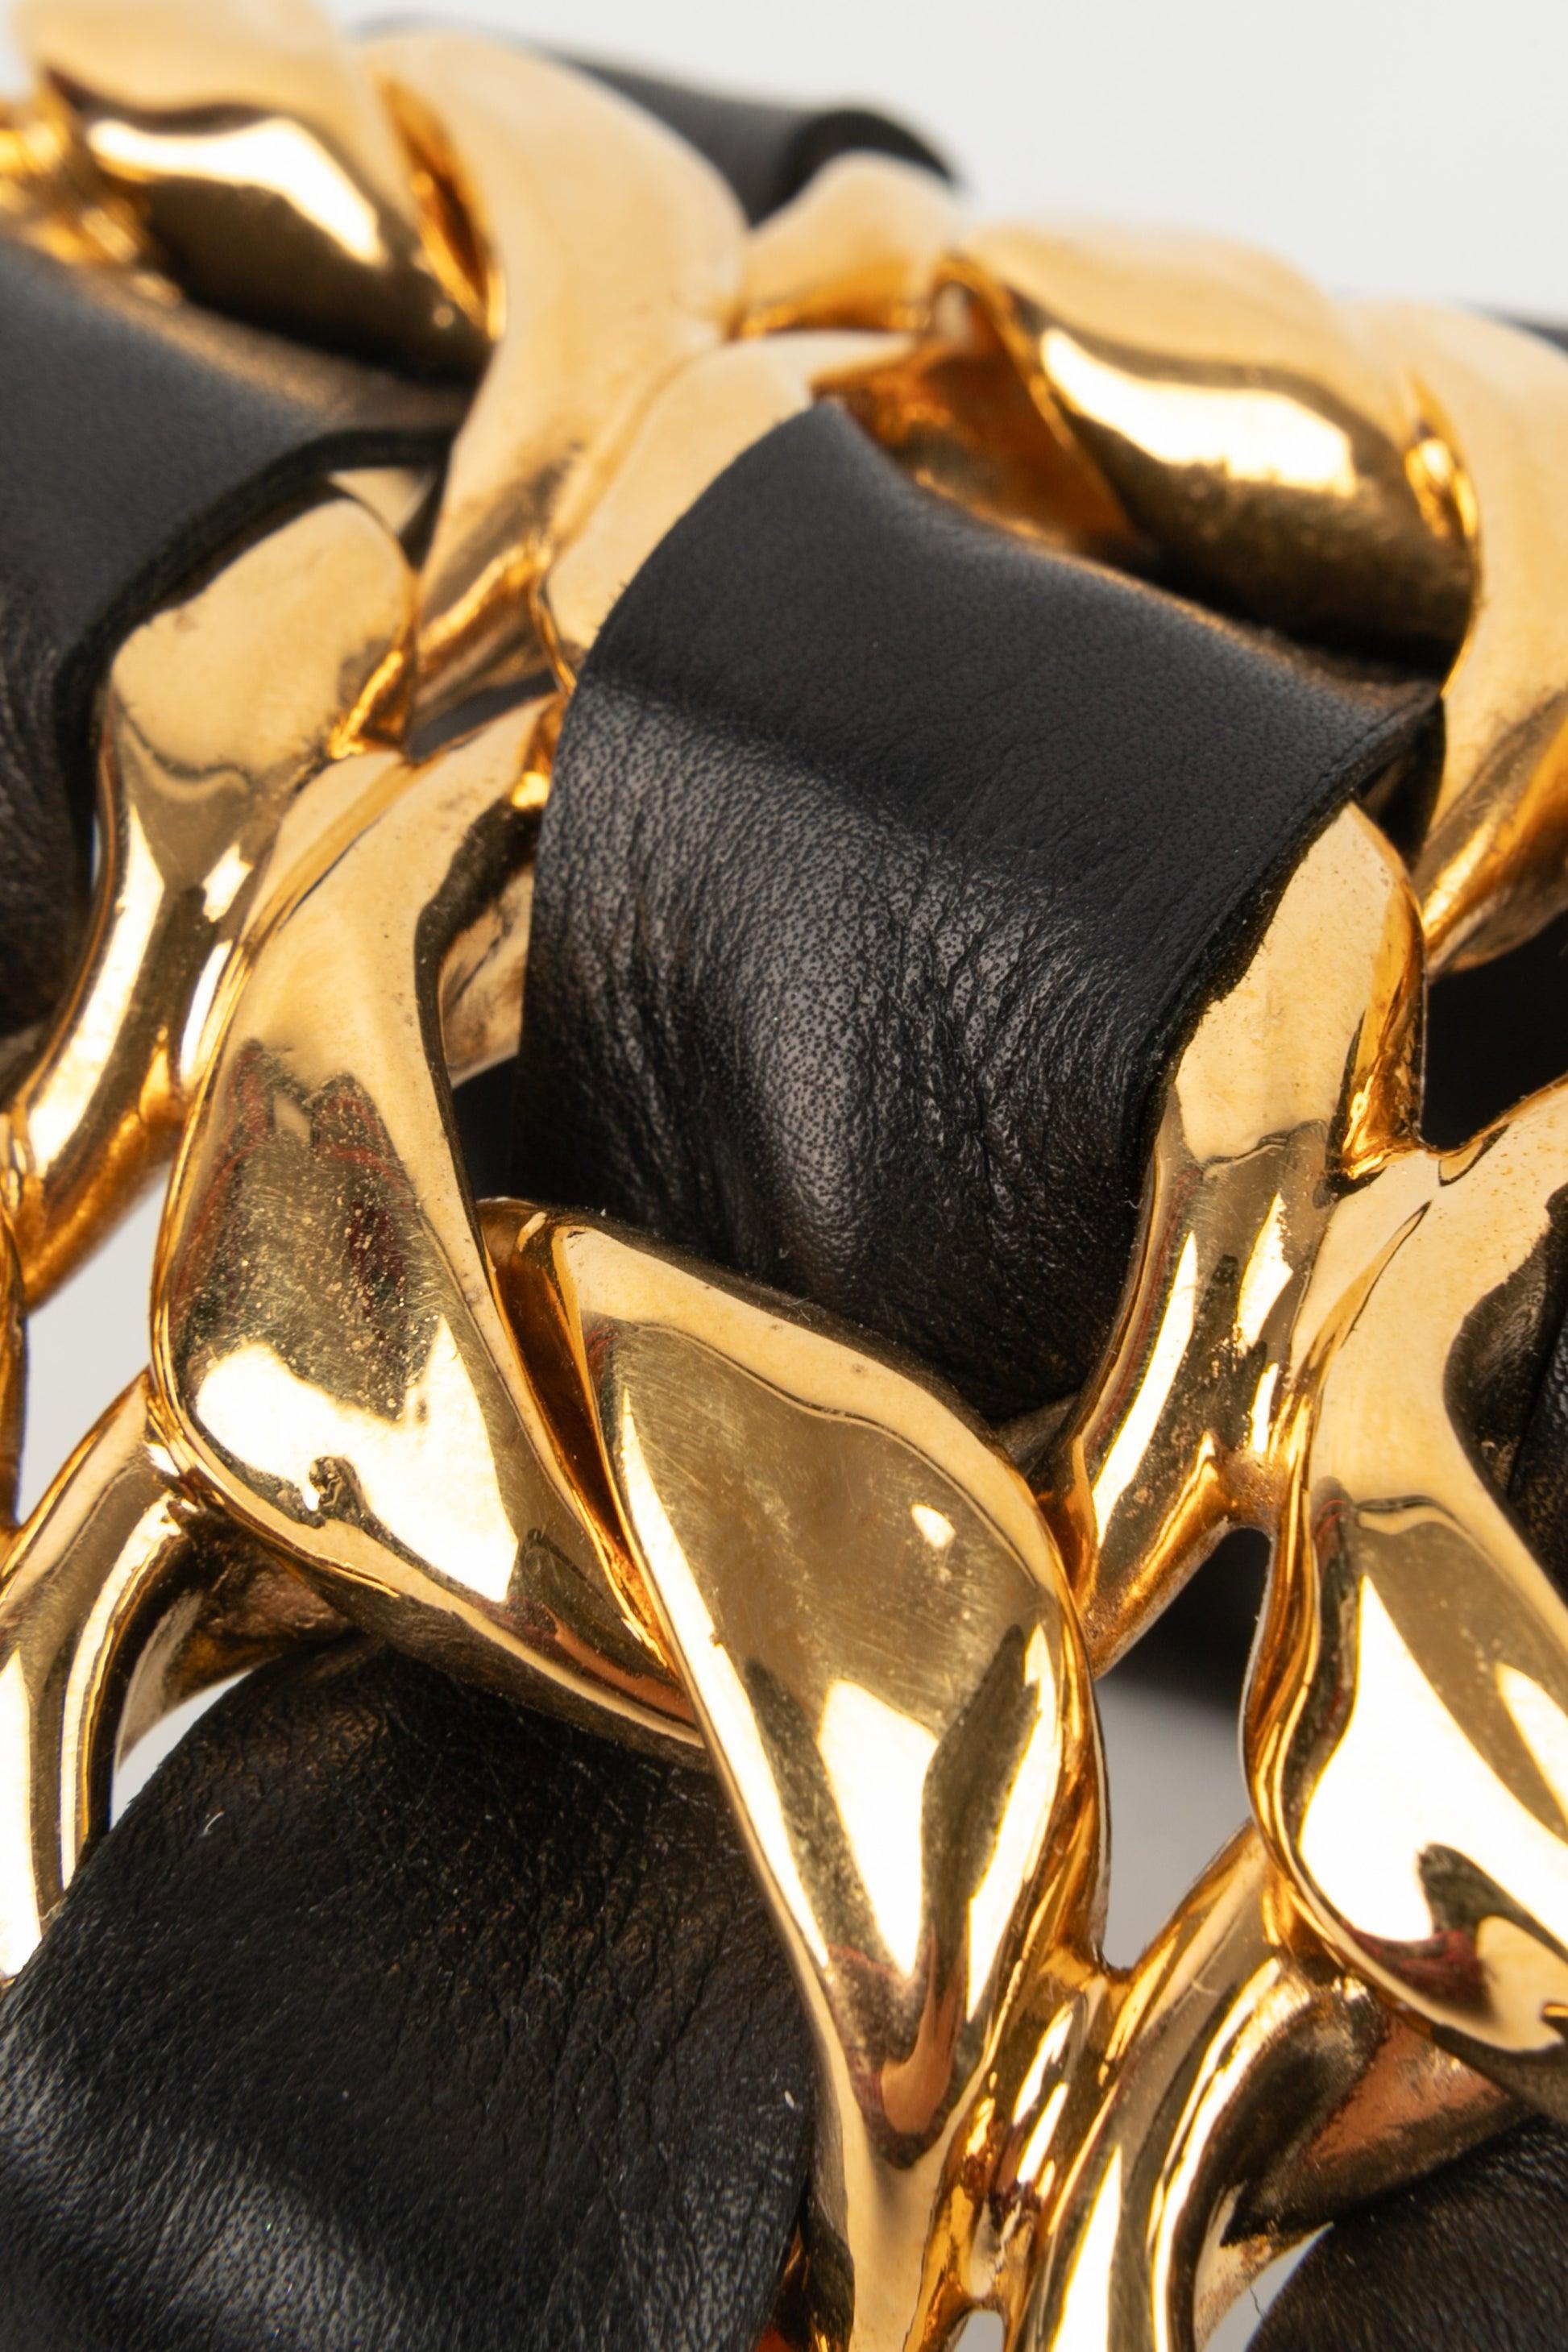 Chanel Cuff Bracelet in Golden Metal with Black Leather, 1980s For Sale 3